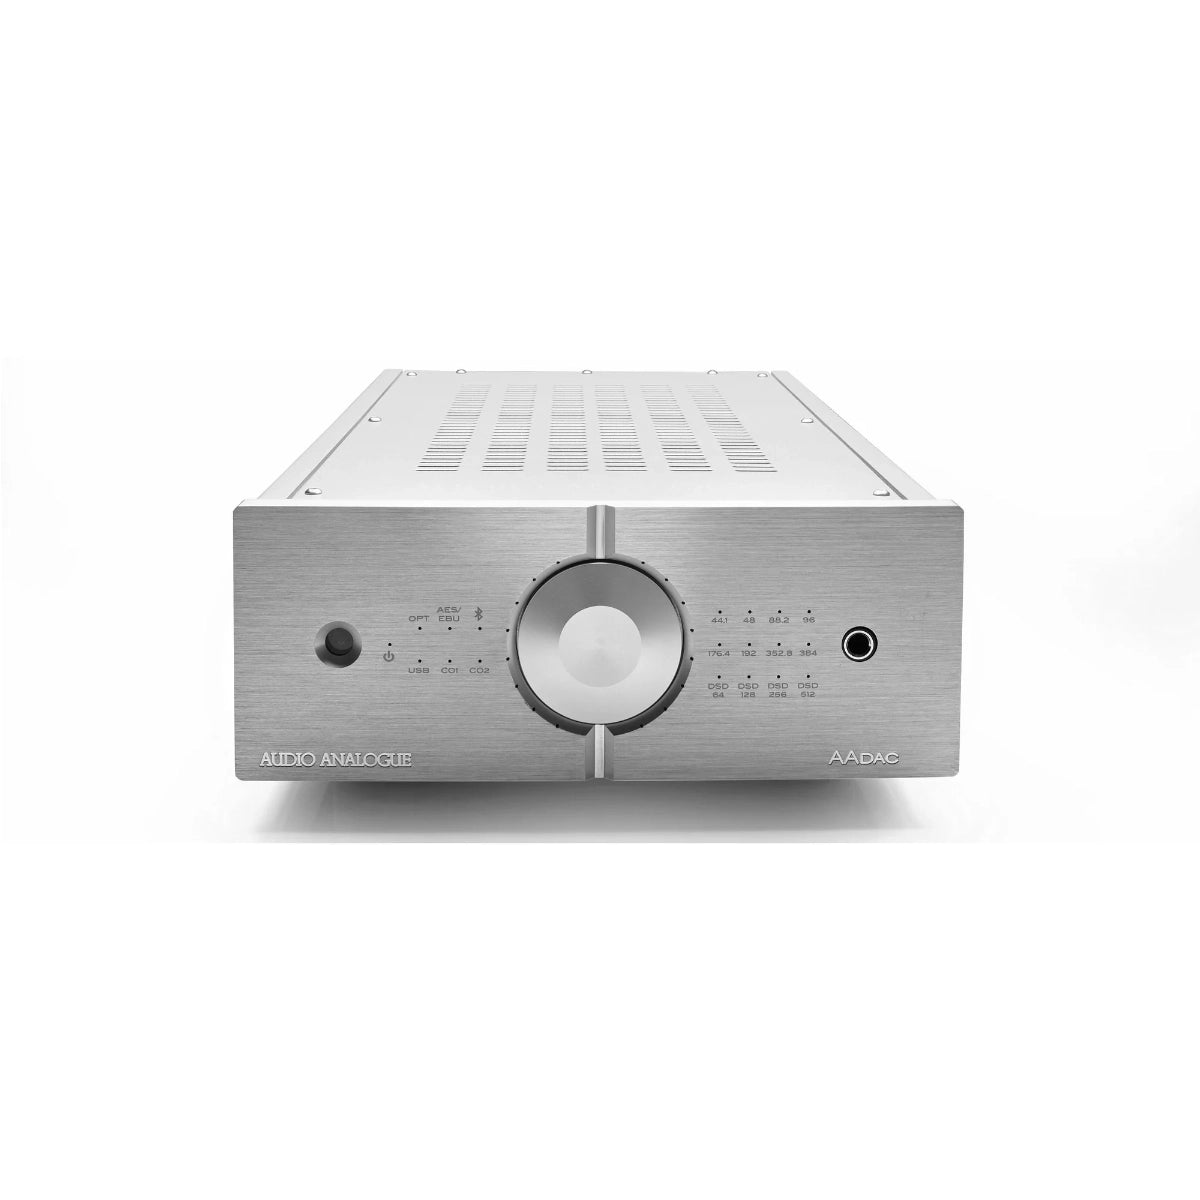 An image of Audio Analogue's AADAC digital to analogue converter in silver.